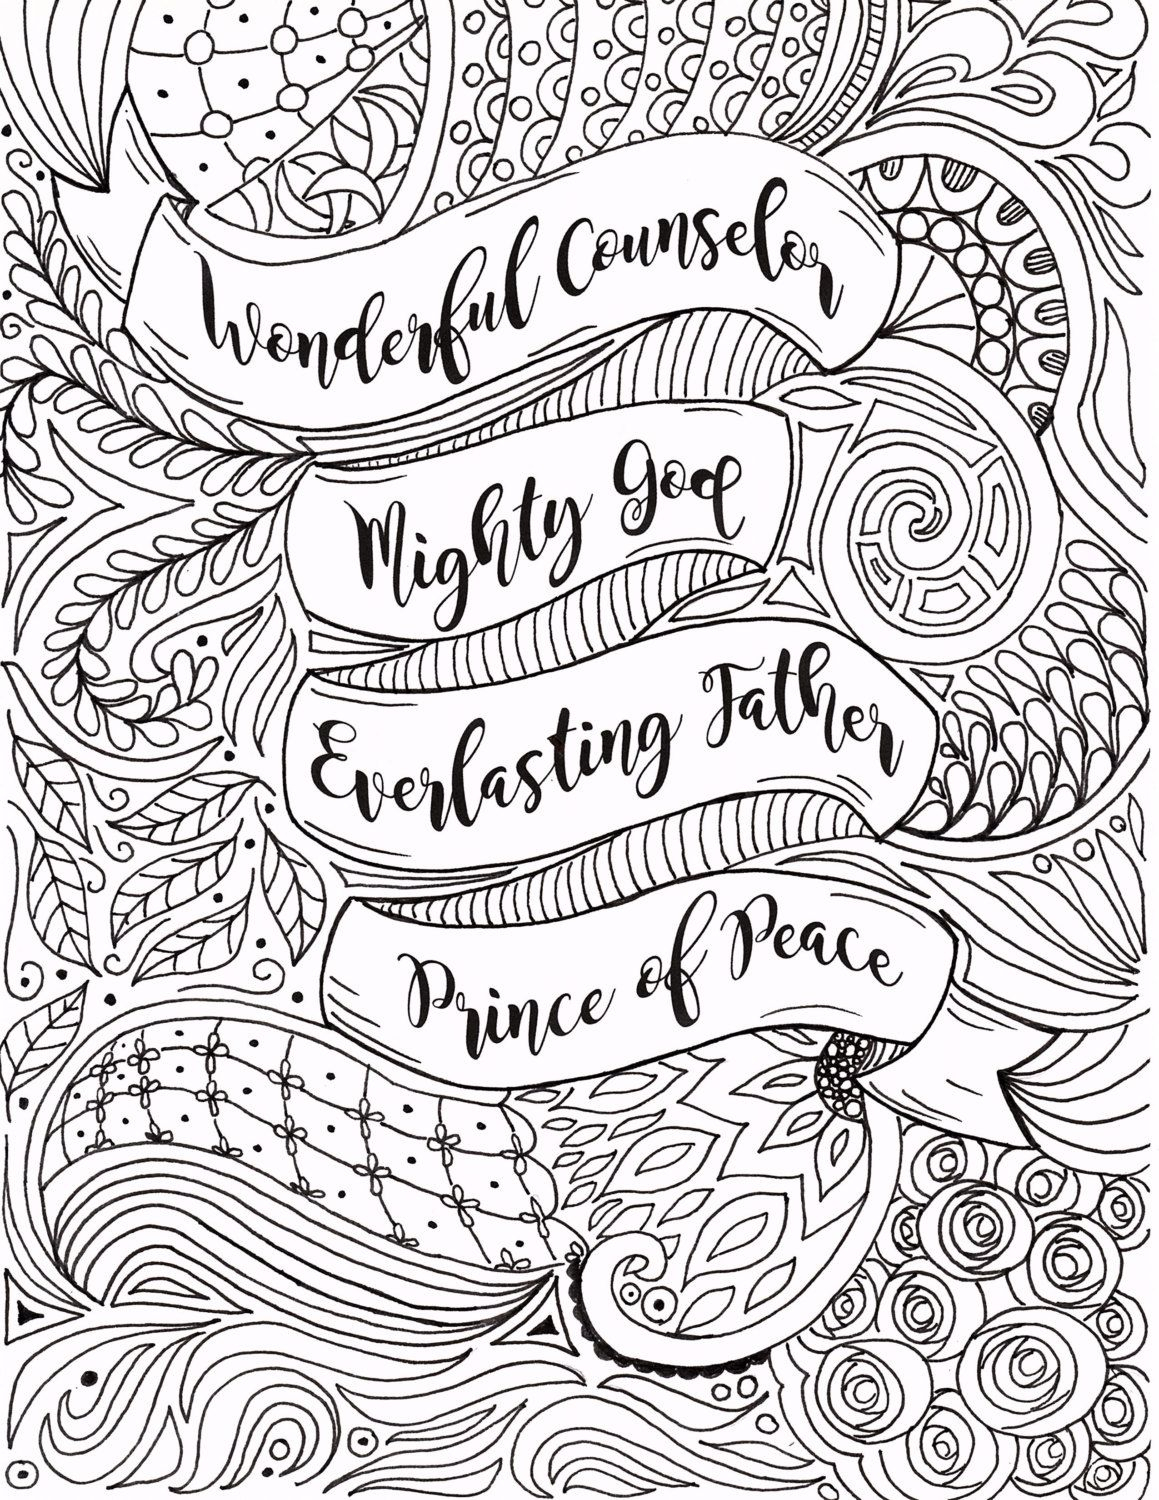 Adult Christmas Coloring Page Christianfourthavepenandink - Free Printable Bible Christmas Coloring Pages